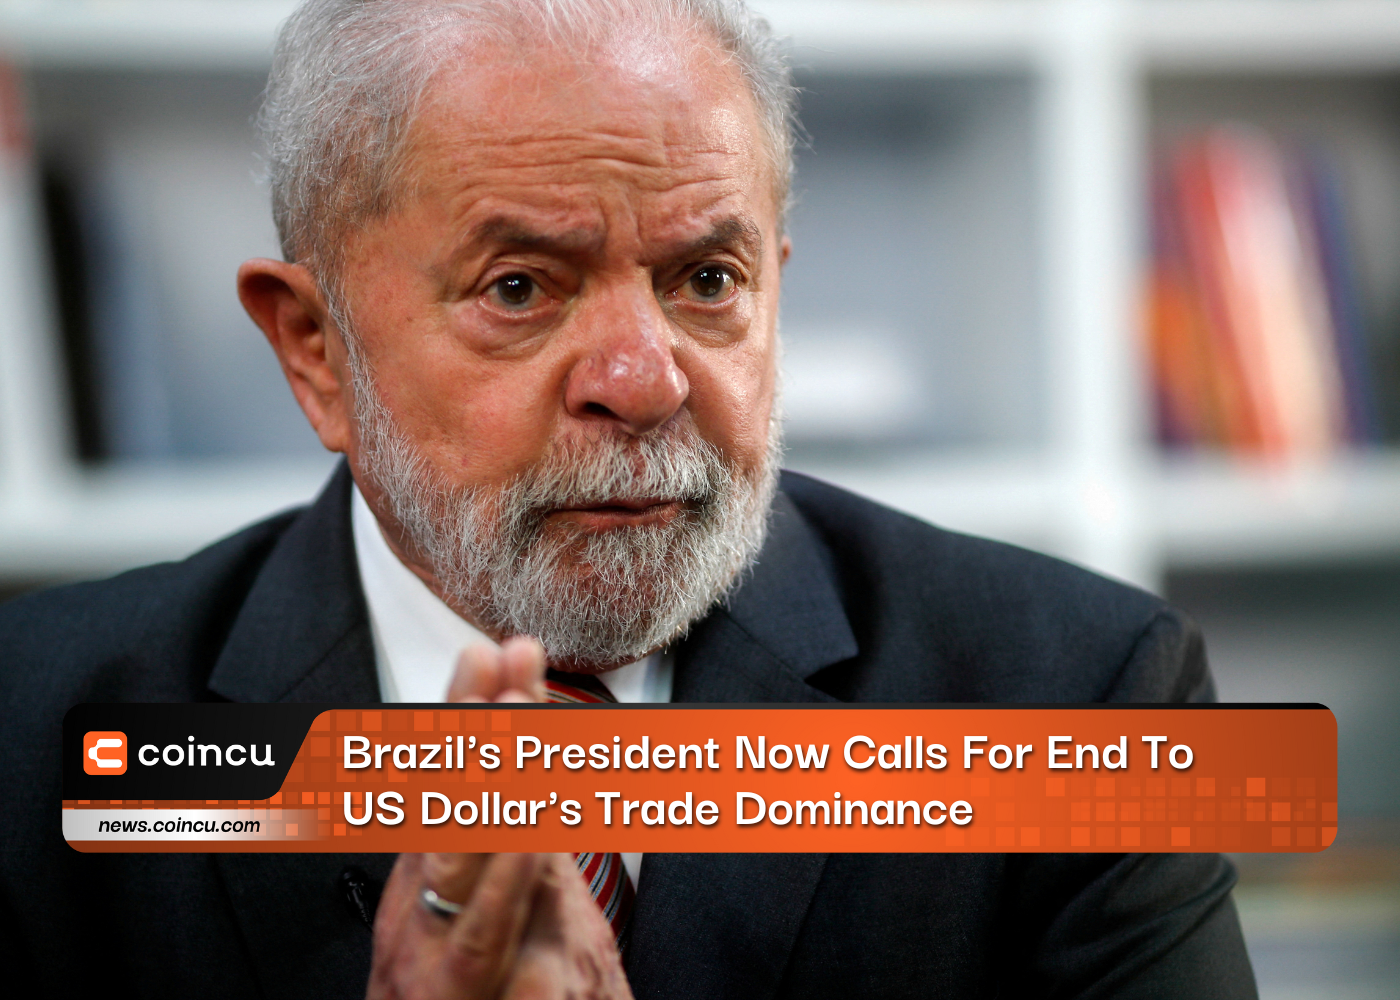 Brazil's President Now Calls For End To US Dollar's Trade Dominance